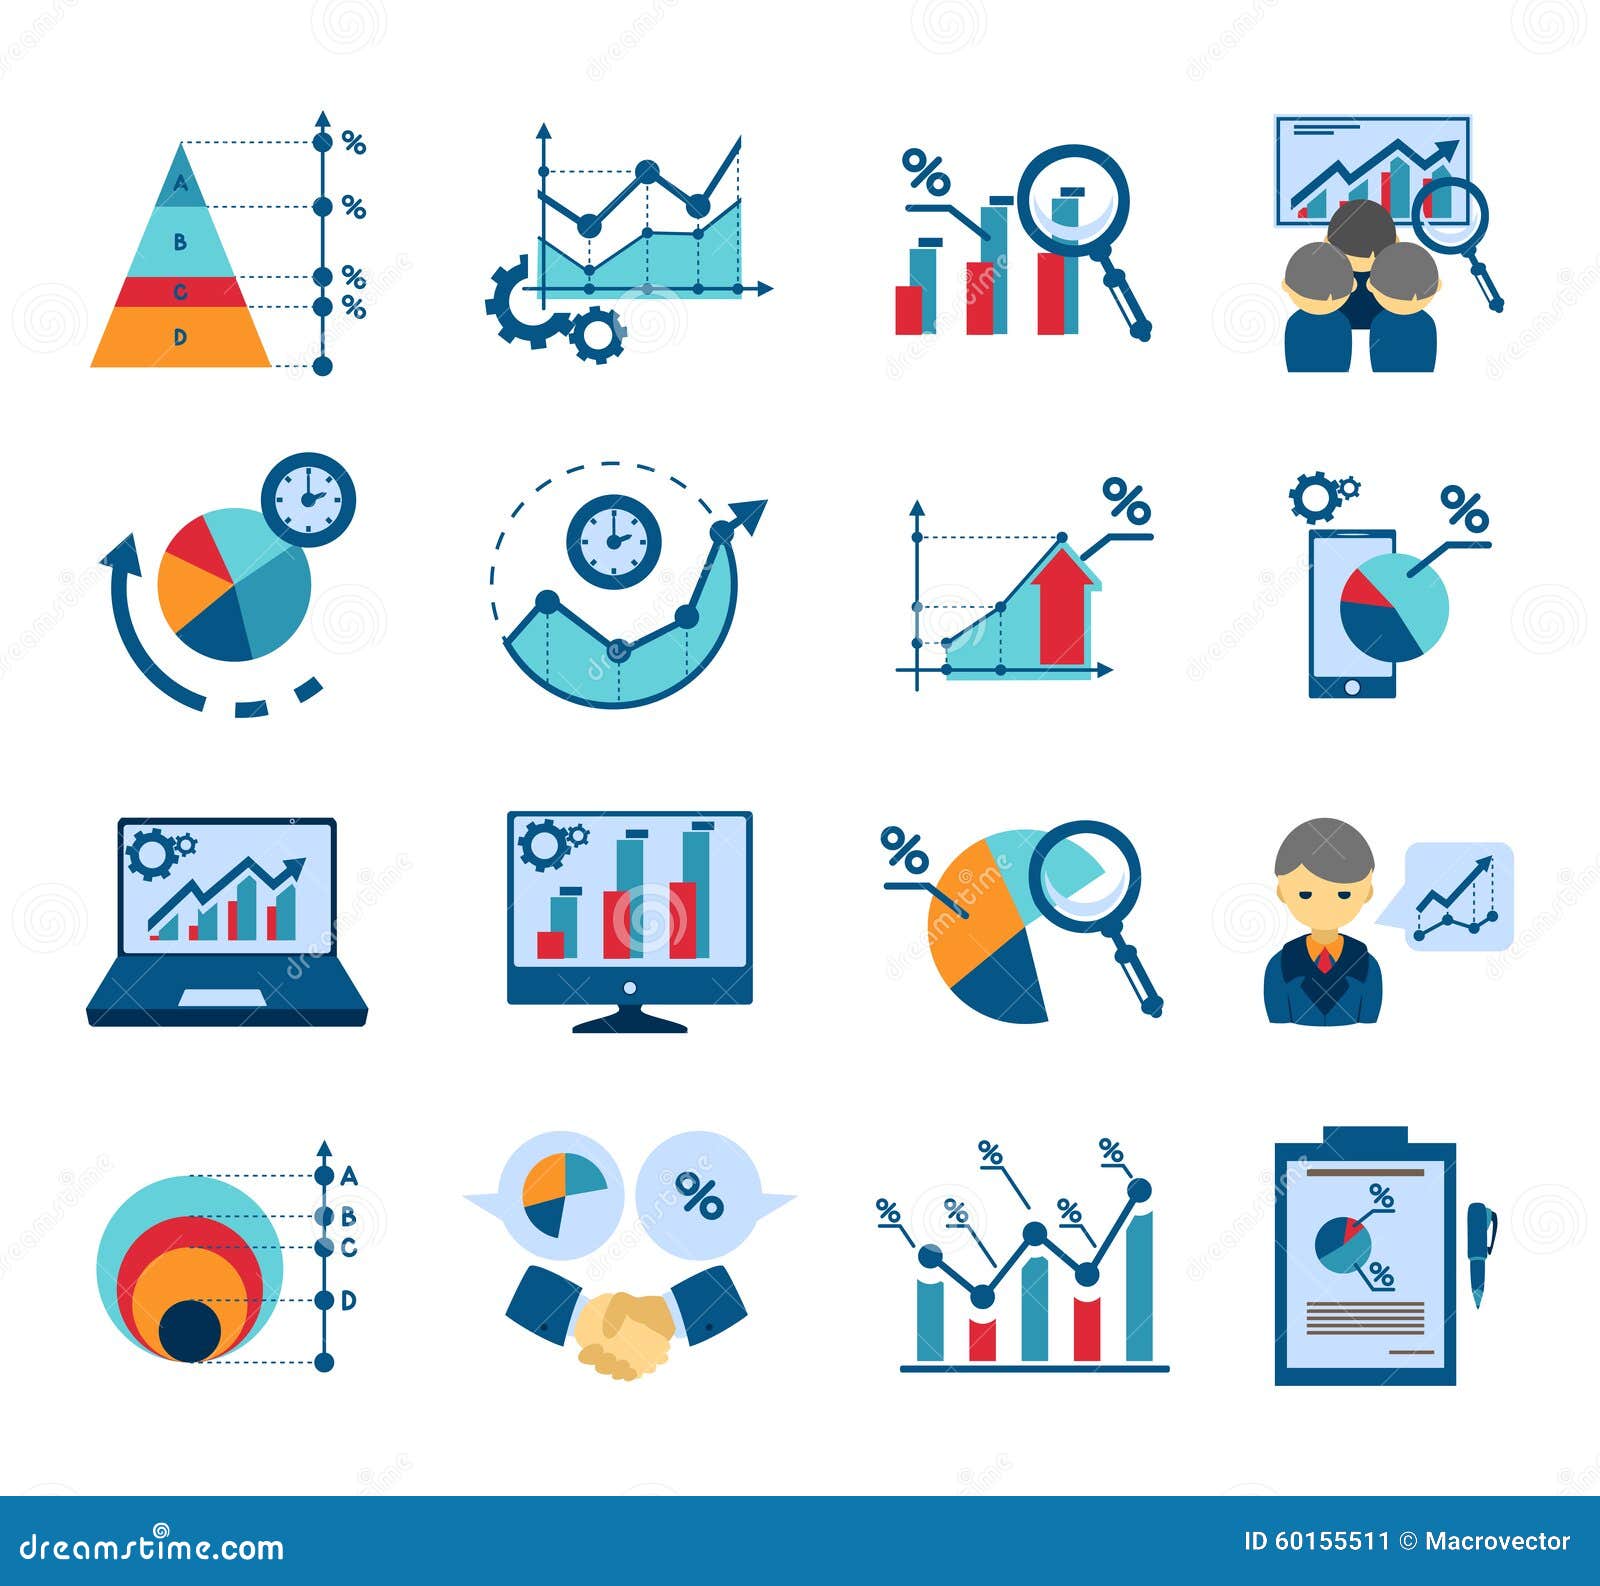 business analysis clipart - photo #45